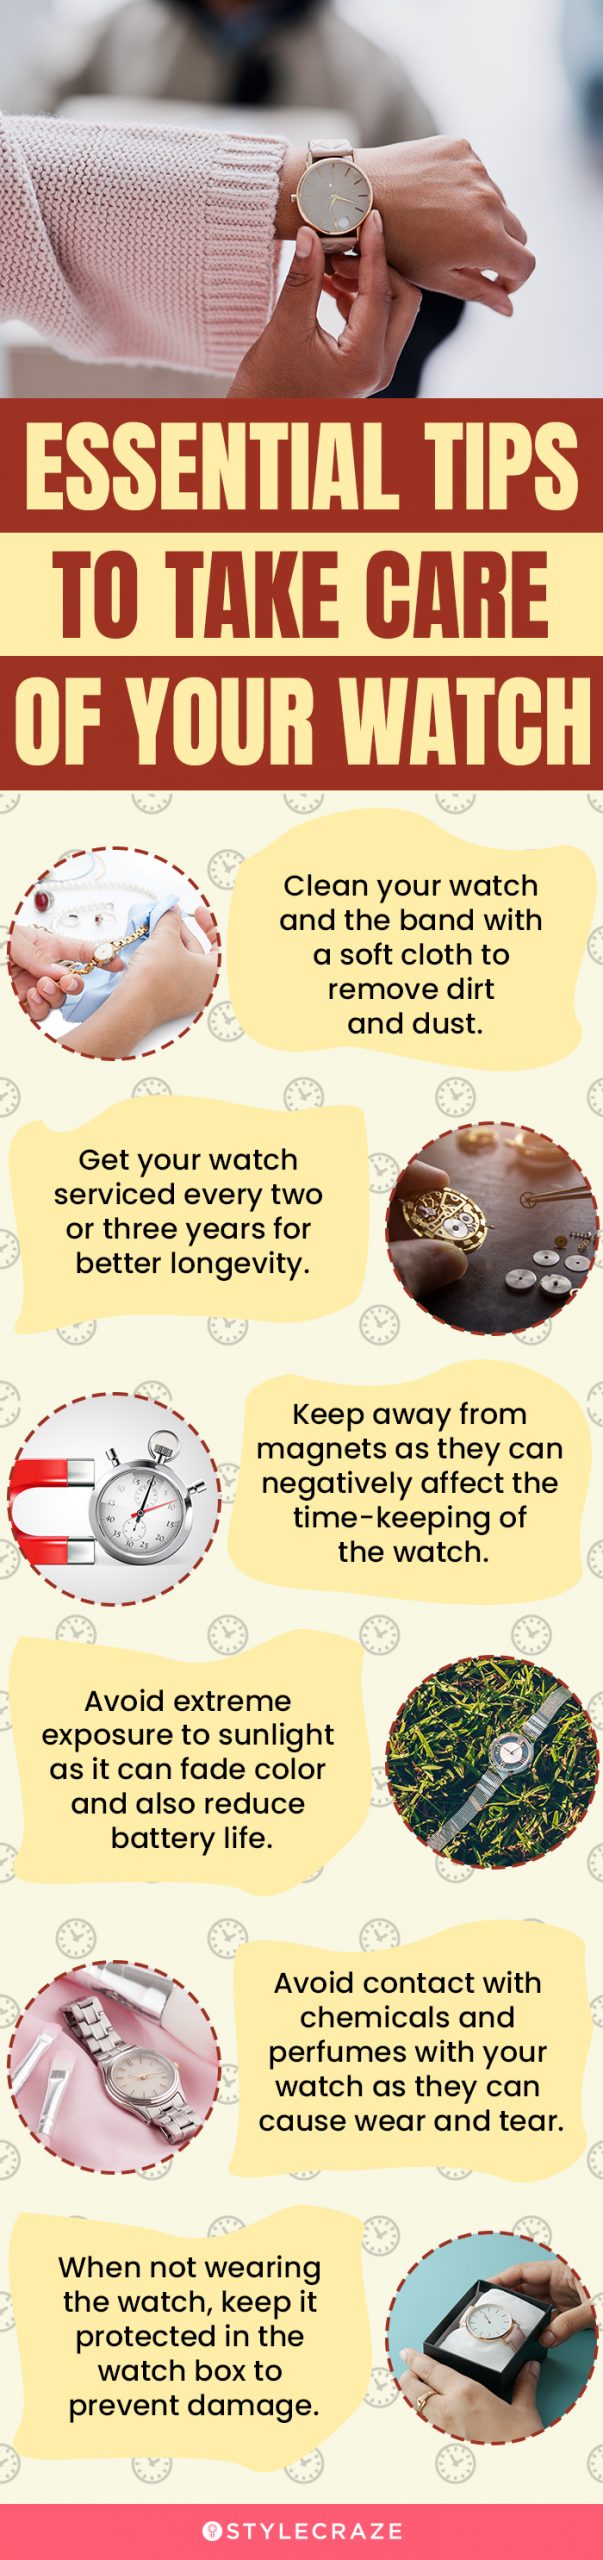 Essential Tips To Take Care Of Your Watch (infographic)